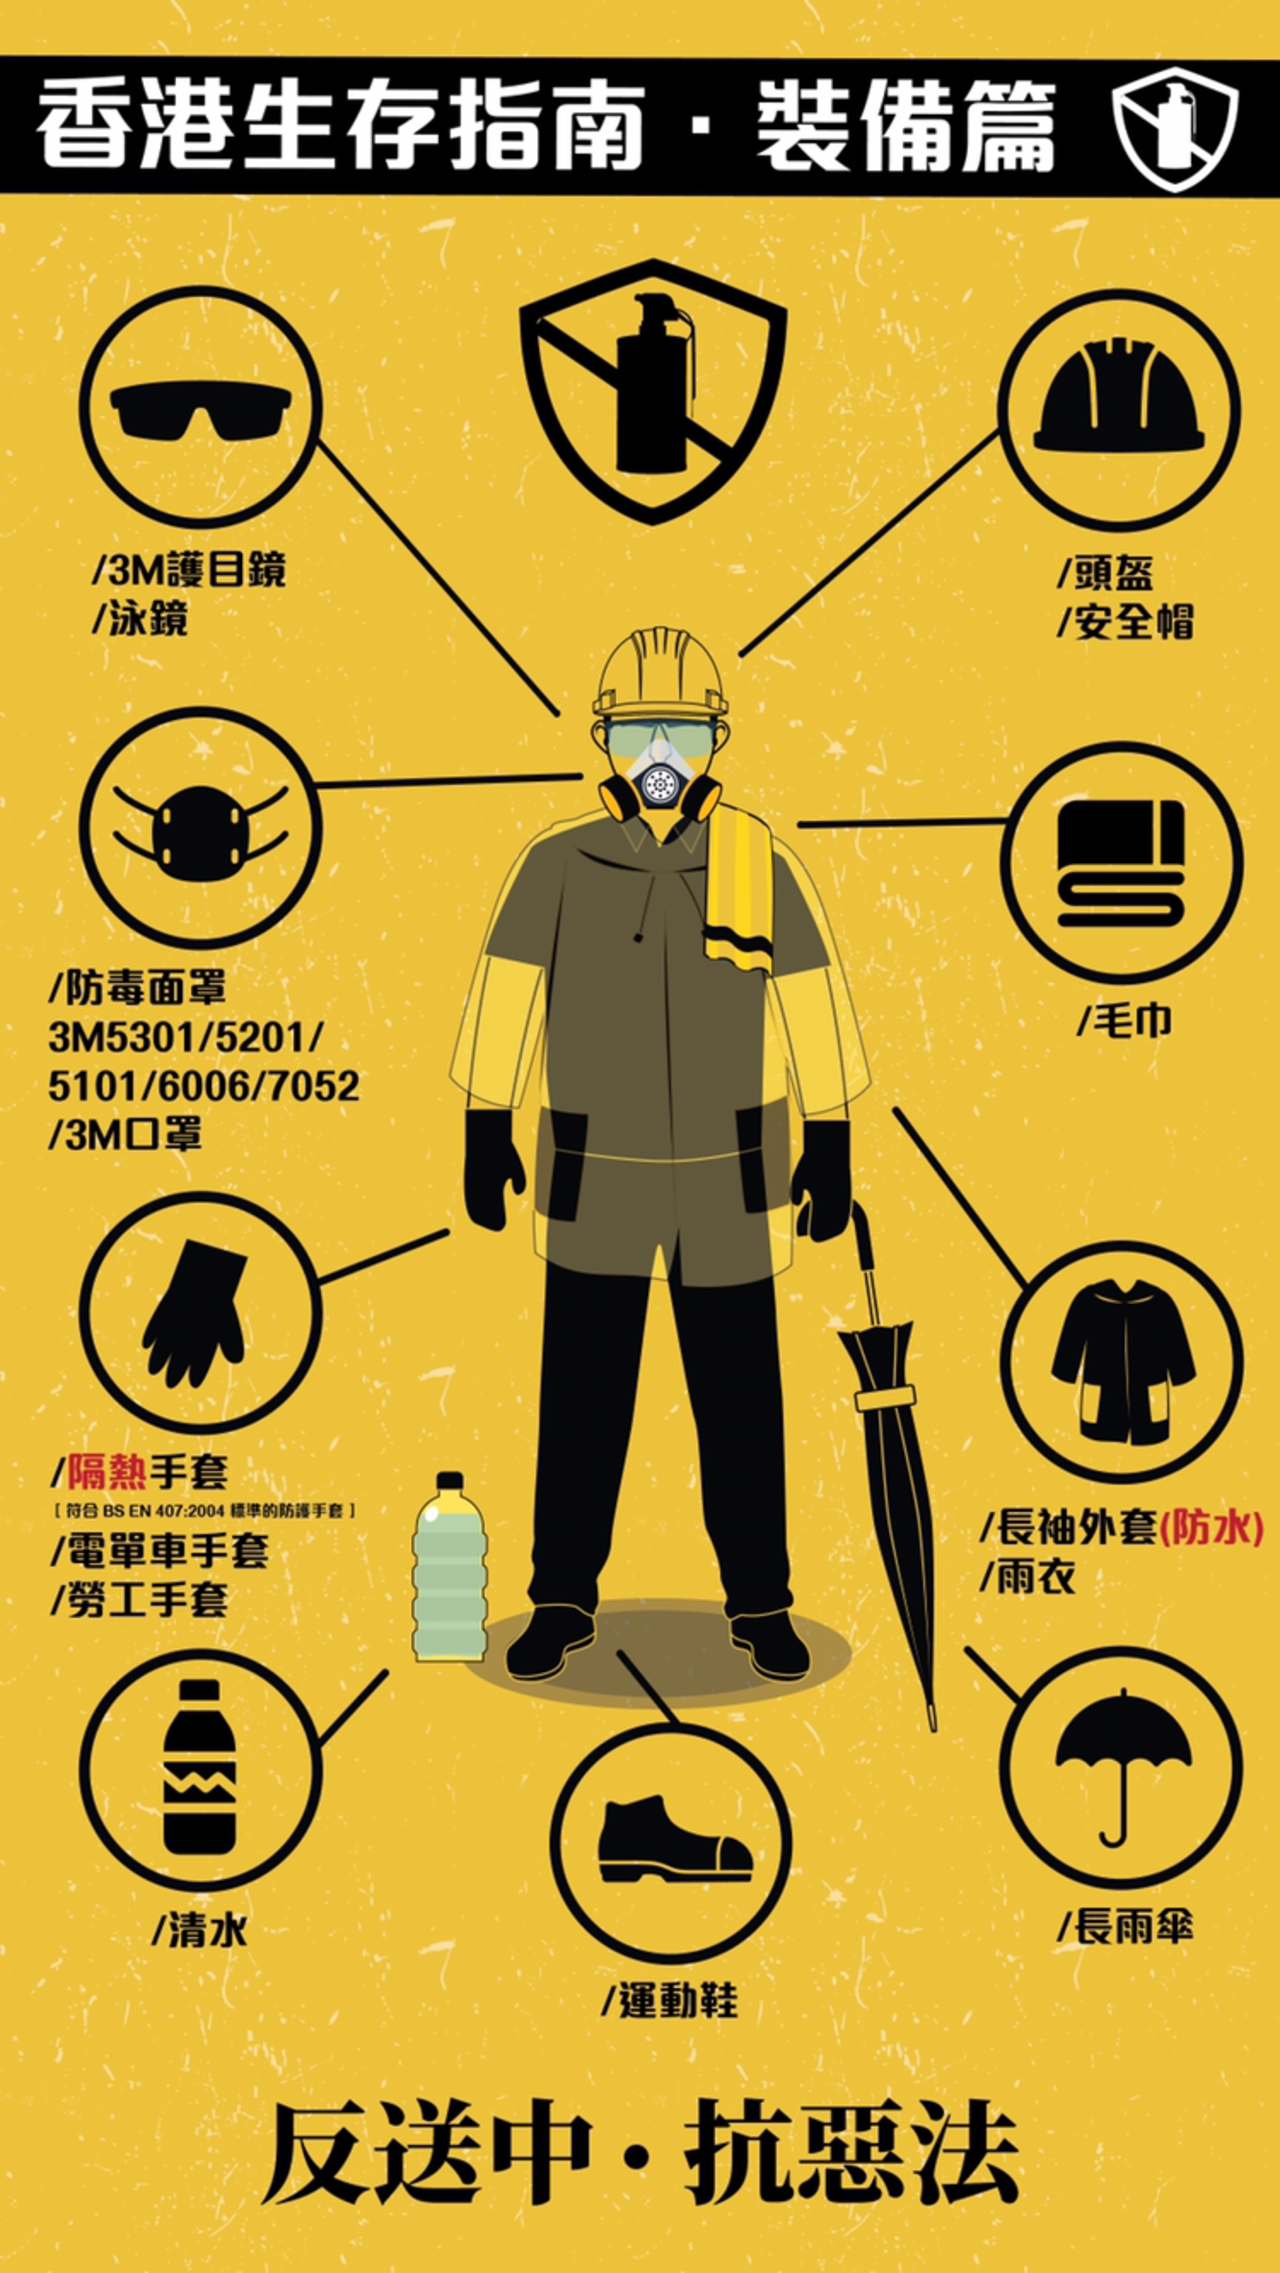 A poster reminds protesters what to bring to demonstrations, and how to protect themselves from tear gas.